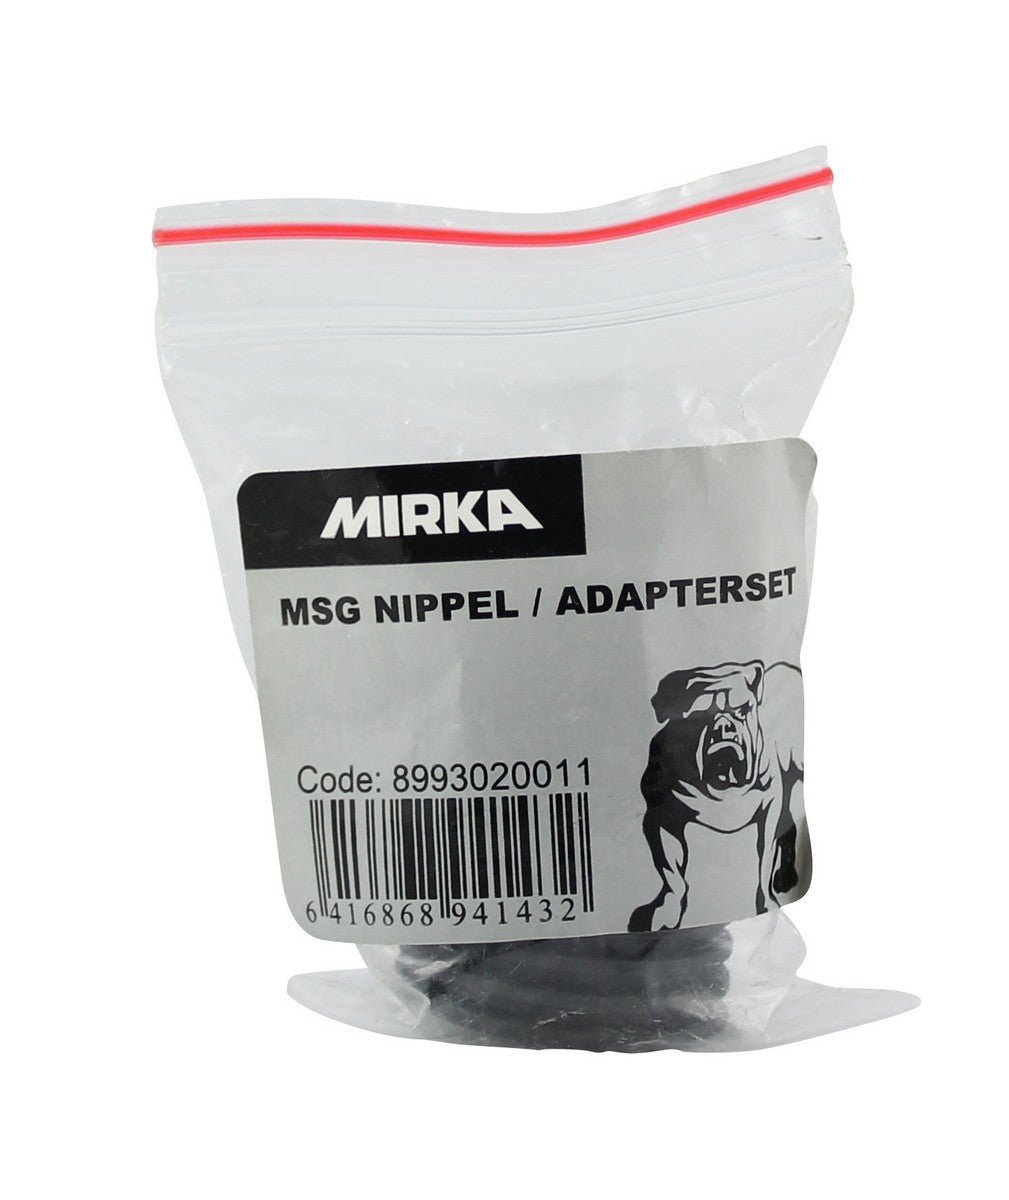 MIRKA MSG NIPPEL / ADAPTERSET - CLEANPRODUCTS